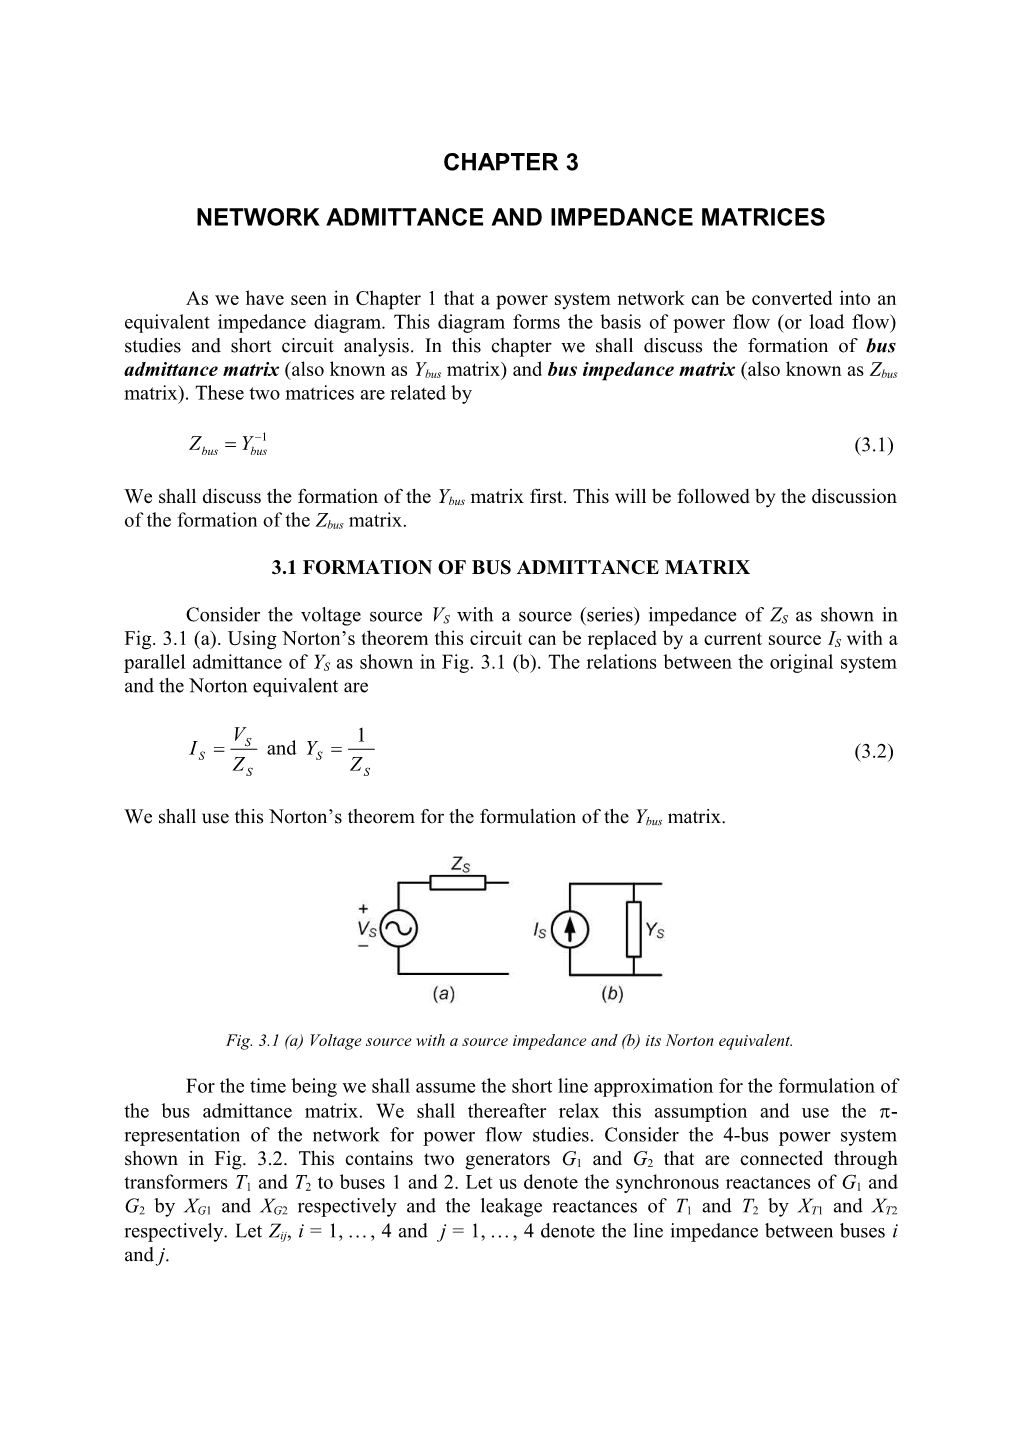 Network Admittance and Impedance Matrices